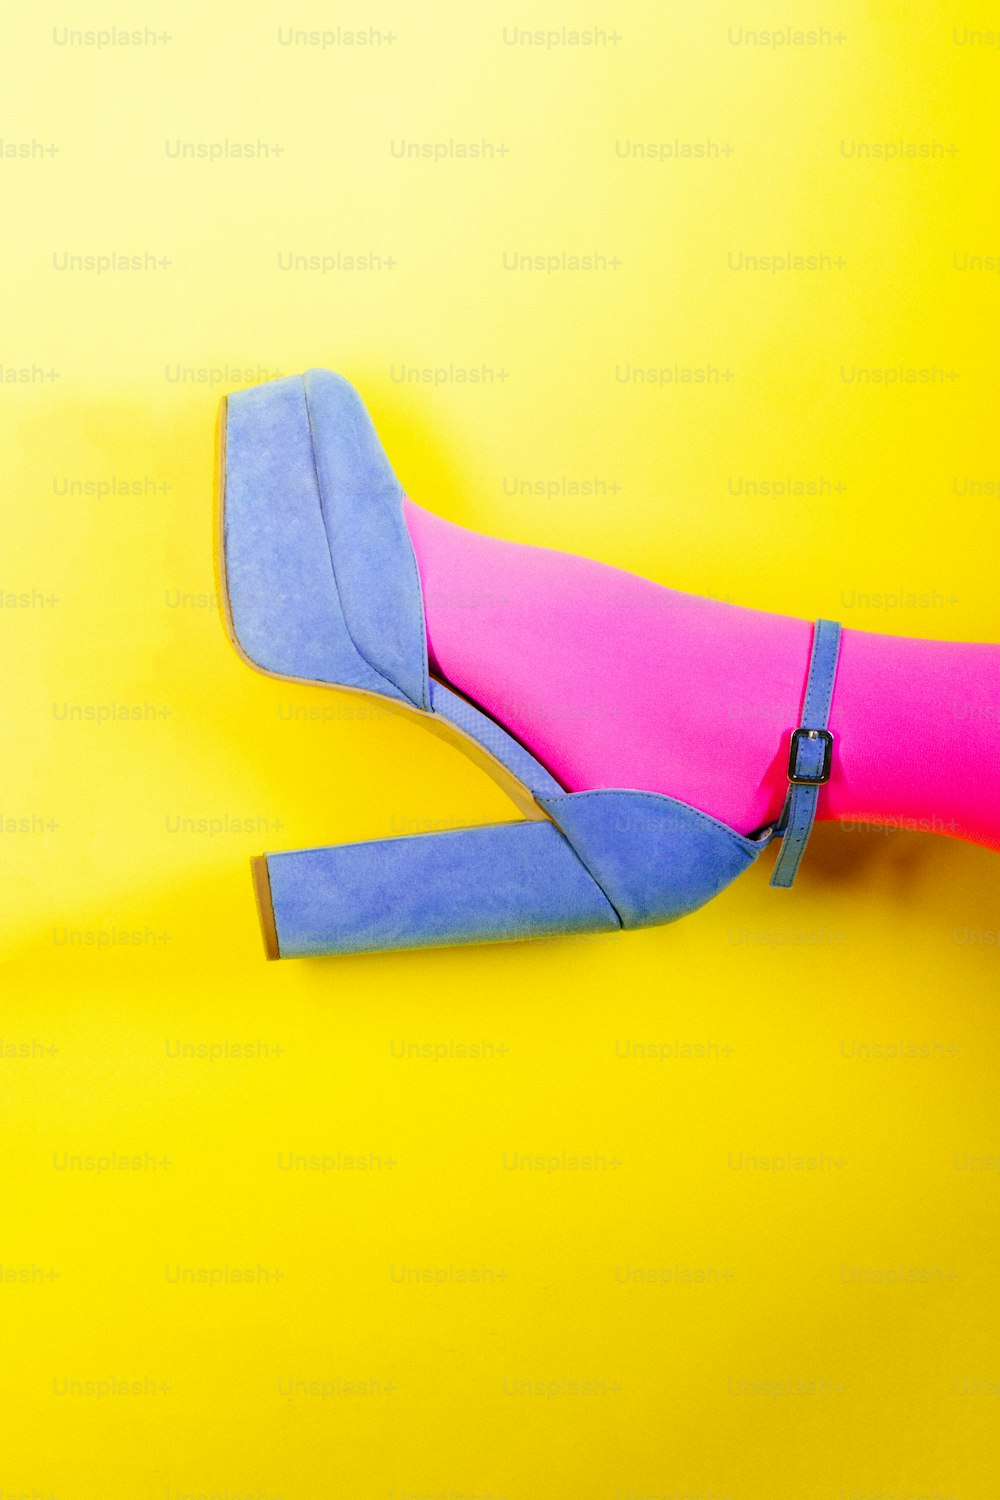 a pair of blue and pink shoes on a yellow background